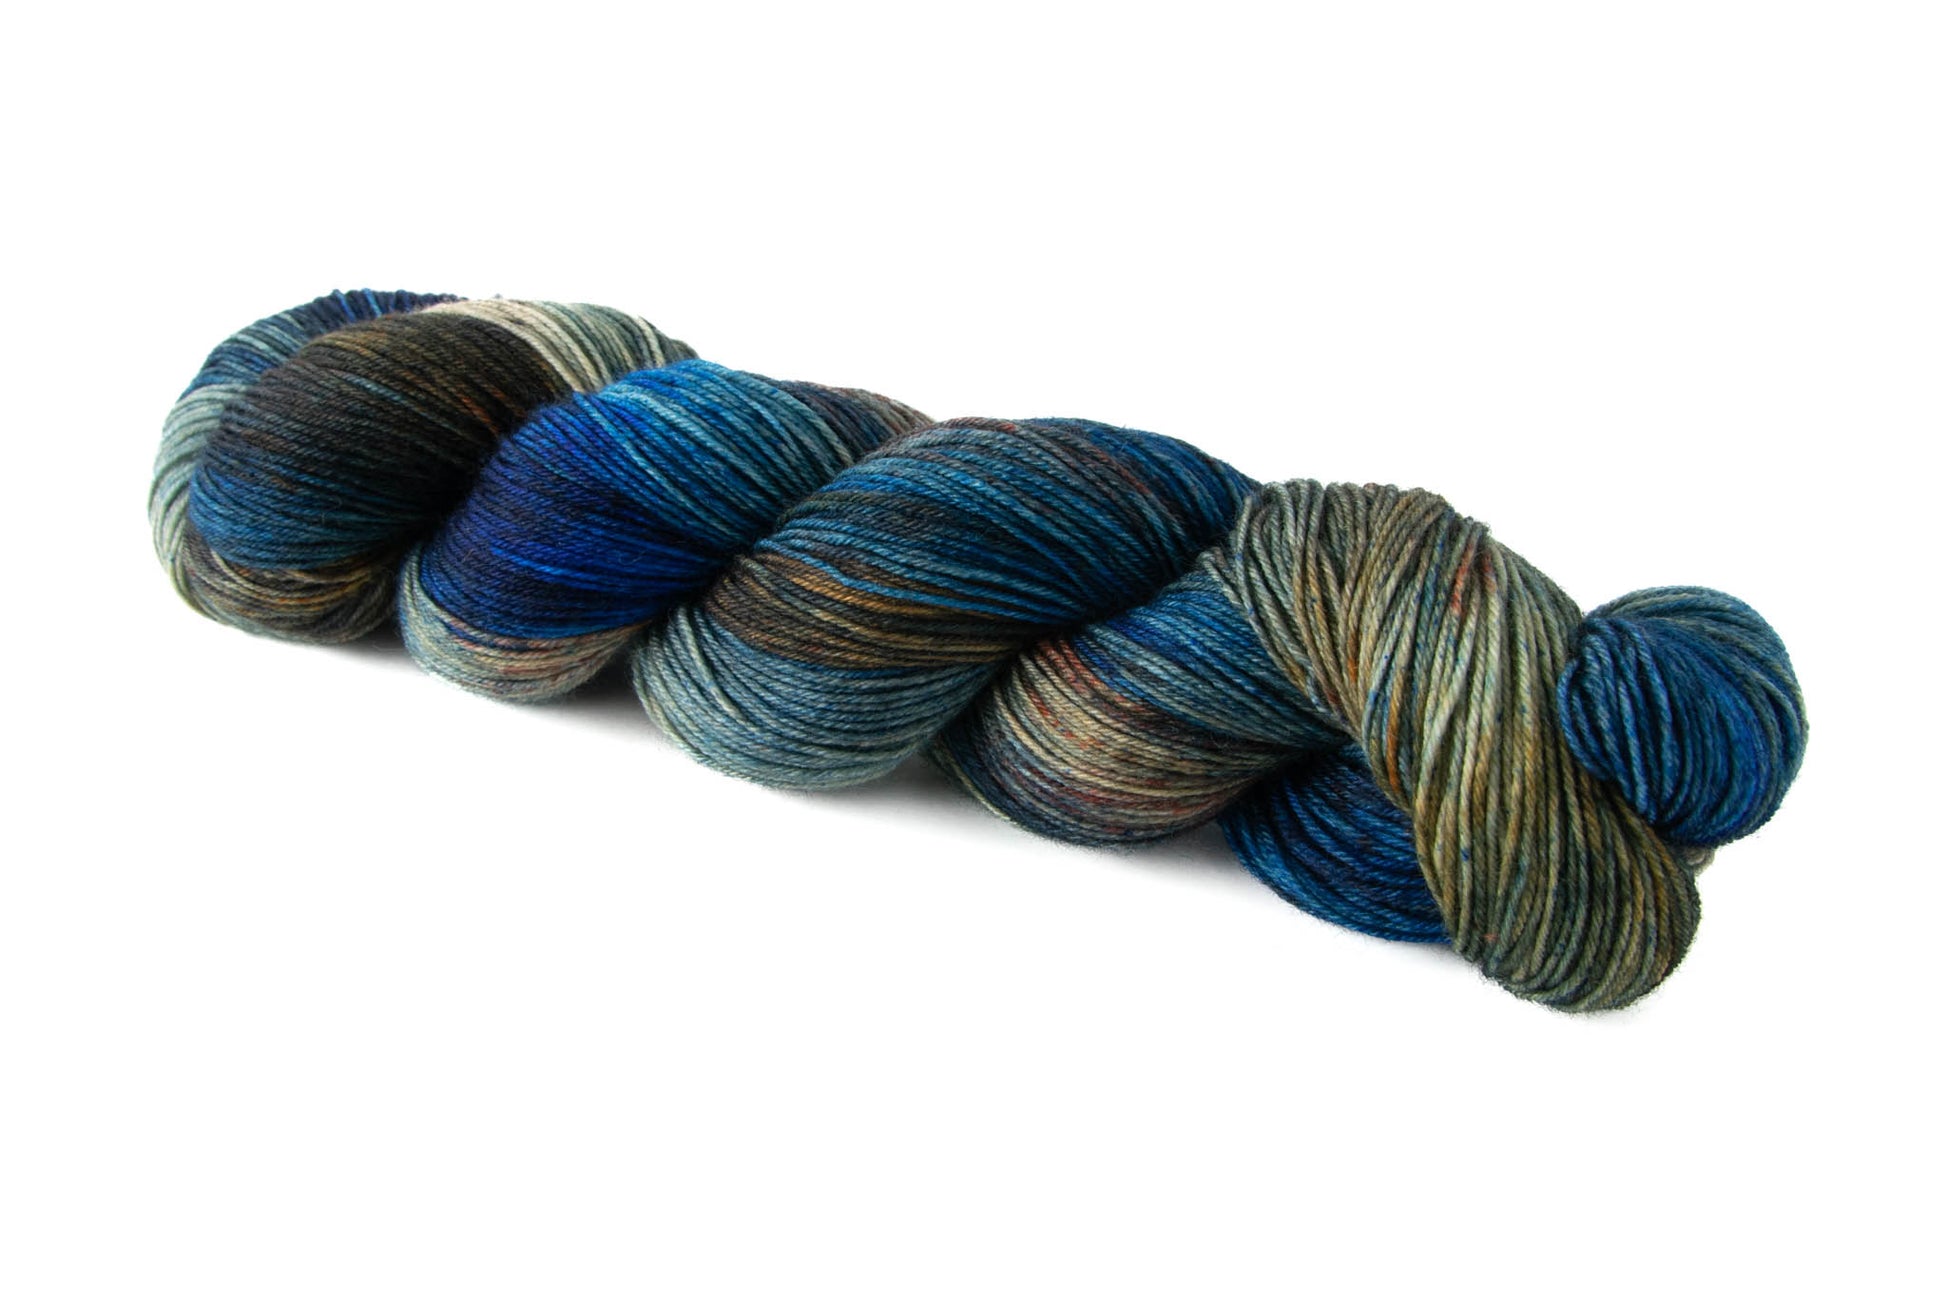 A skein of deep blue hand-dyed wool yarn with sections of dark brown and lighter tan sections with orange speckles.